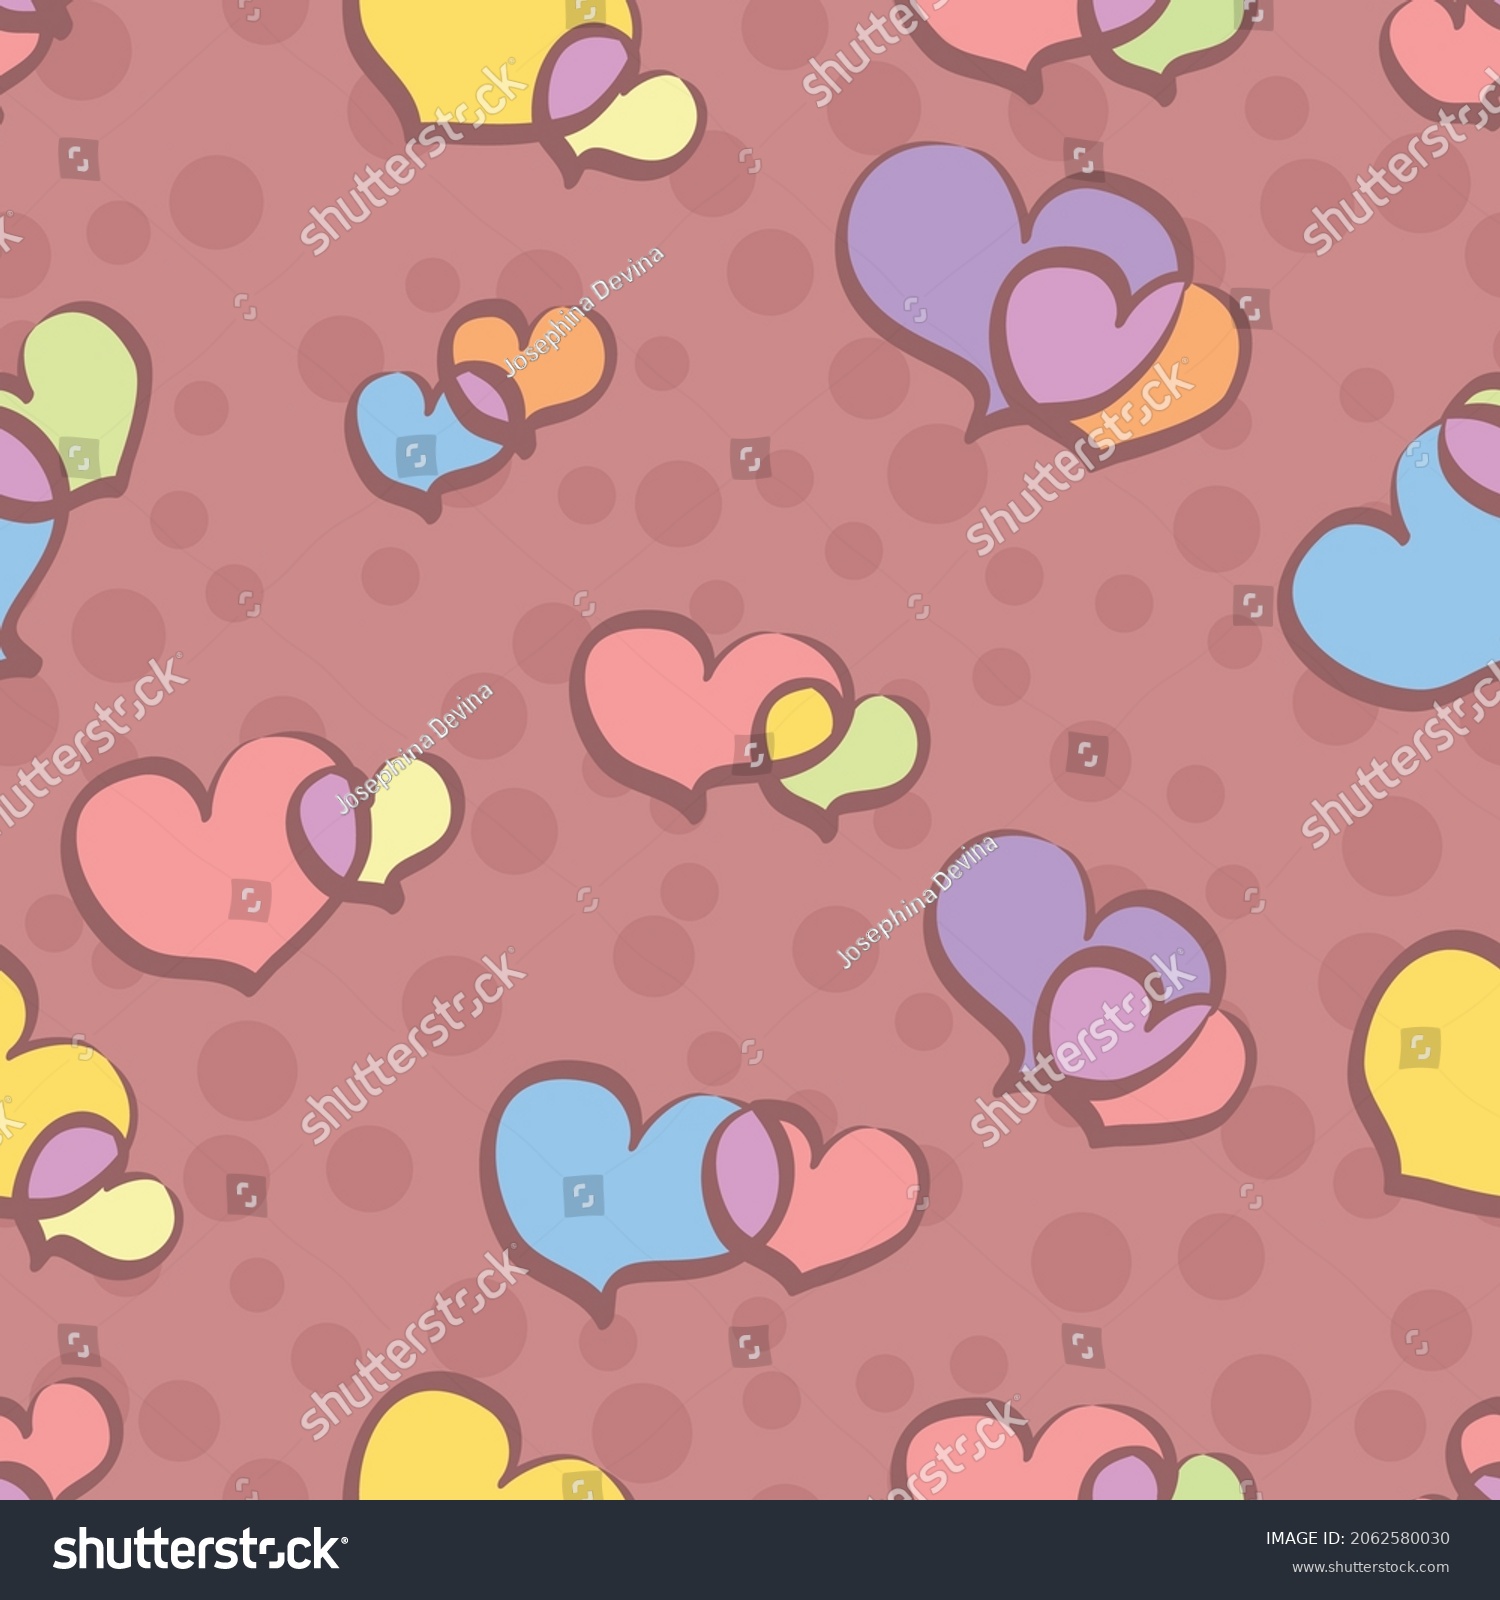 SVG of Cute double heart vector repeat pattern in pastel multicolor on a dusky pink background with polka dots svg